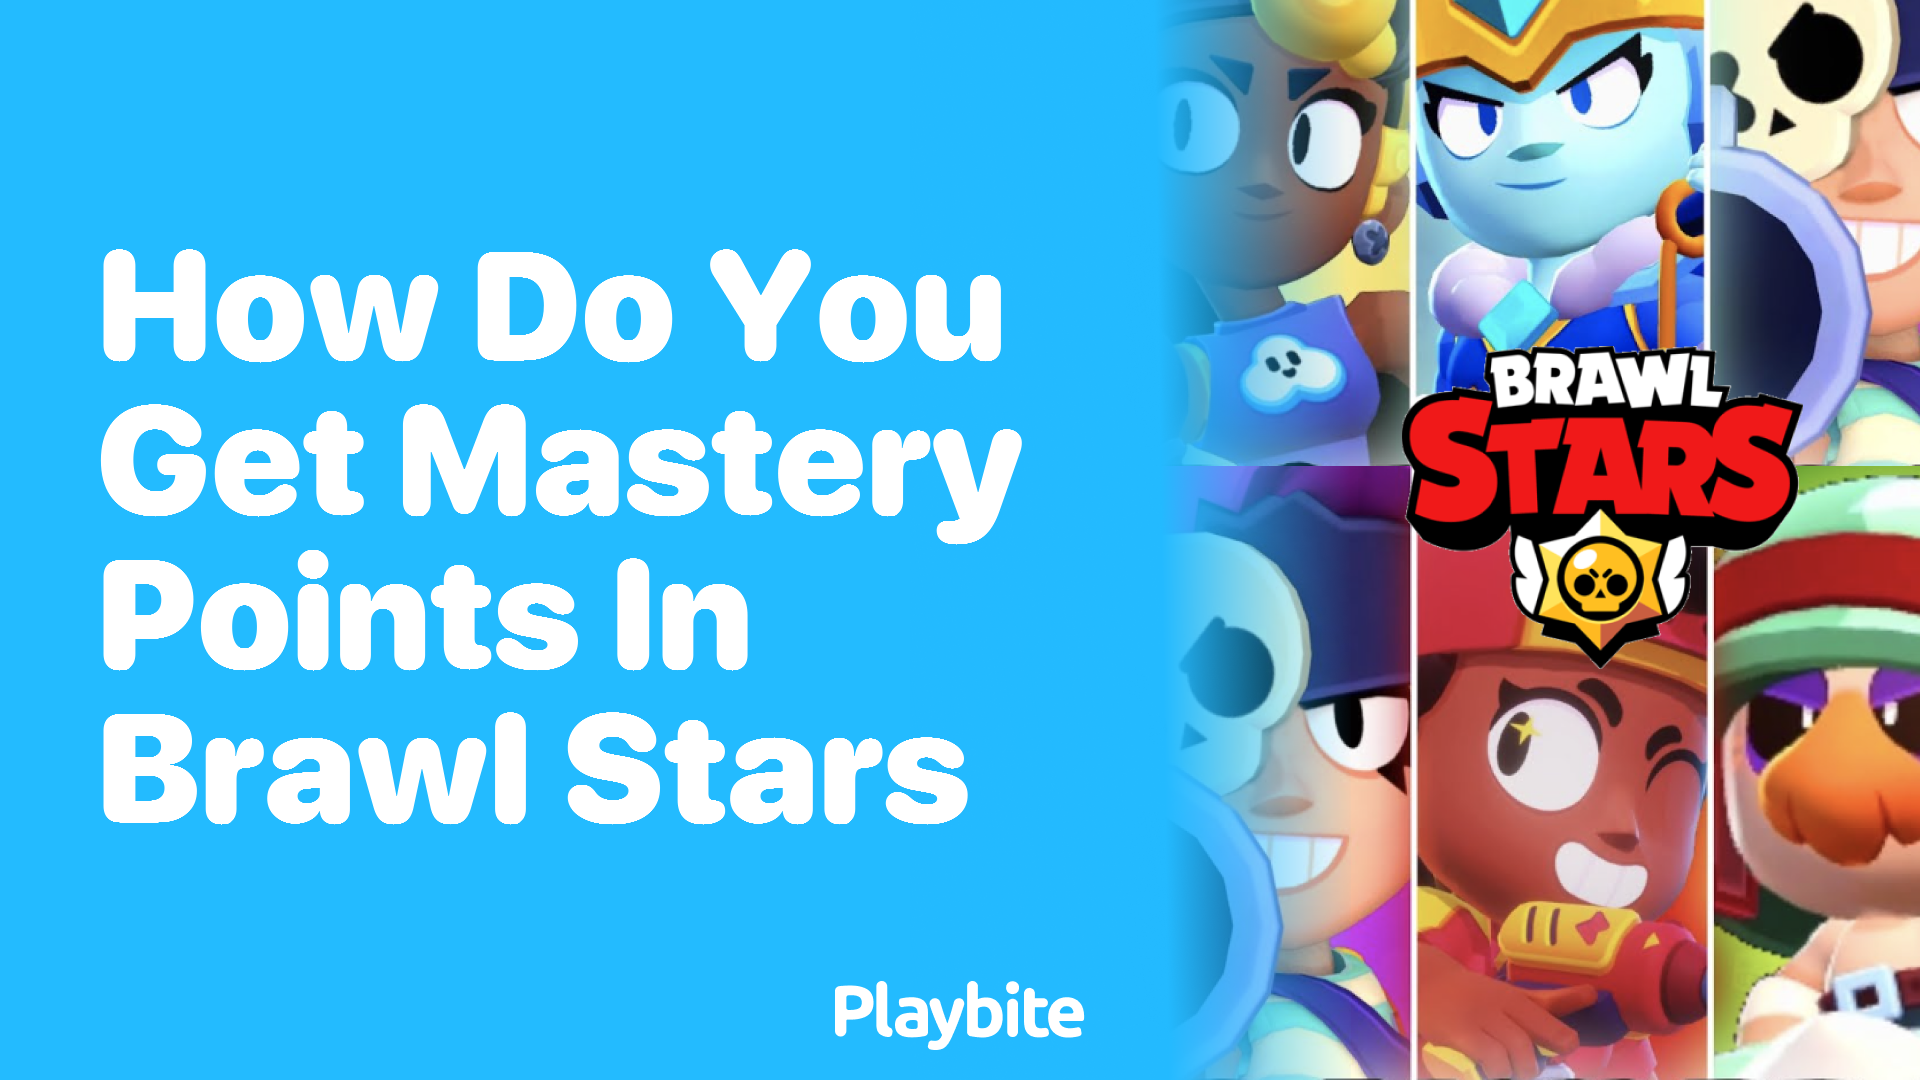 How Do You Get Mastery Points in Brawl Stars?